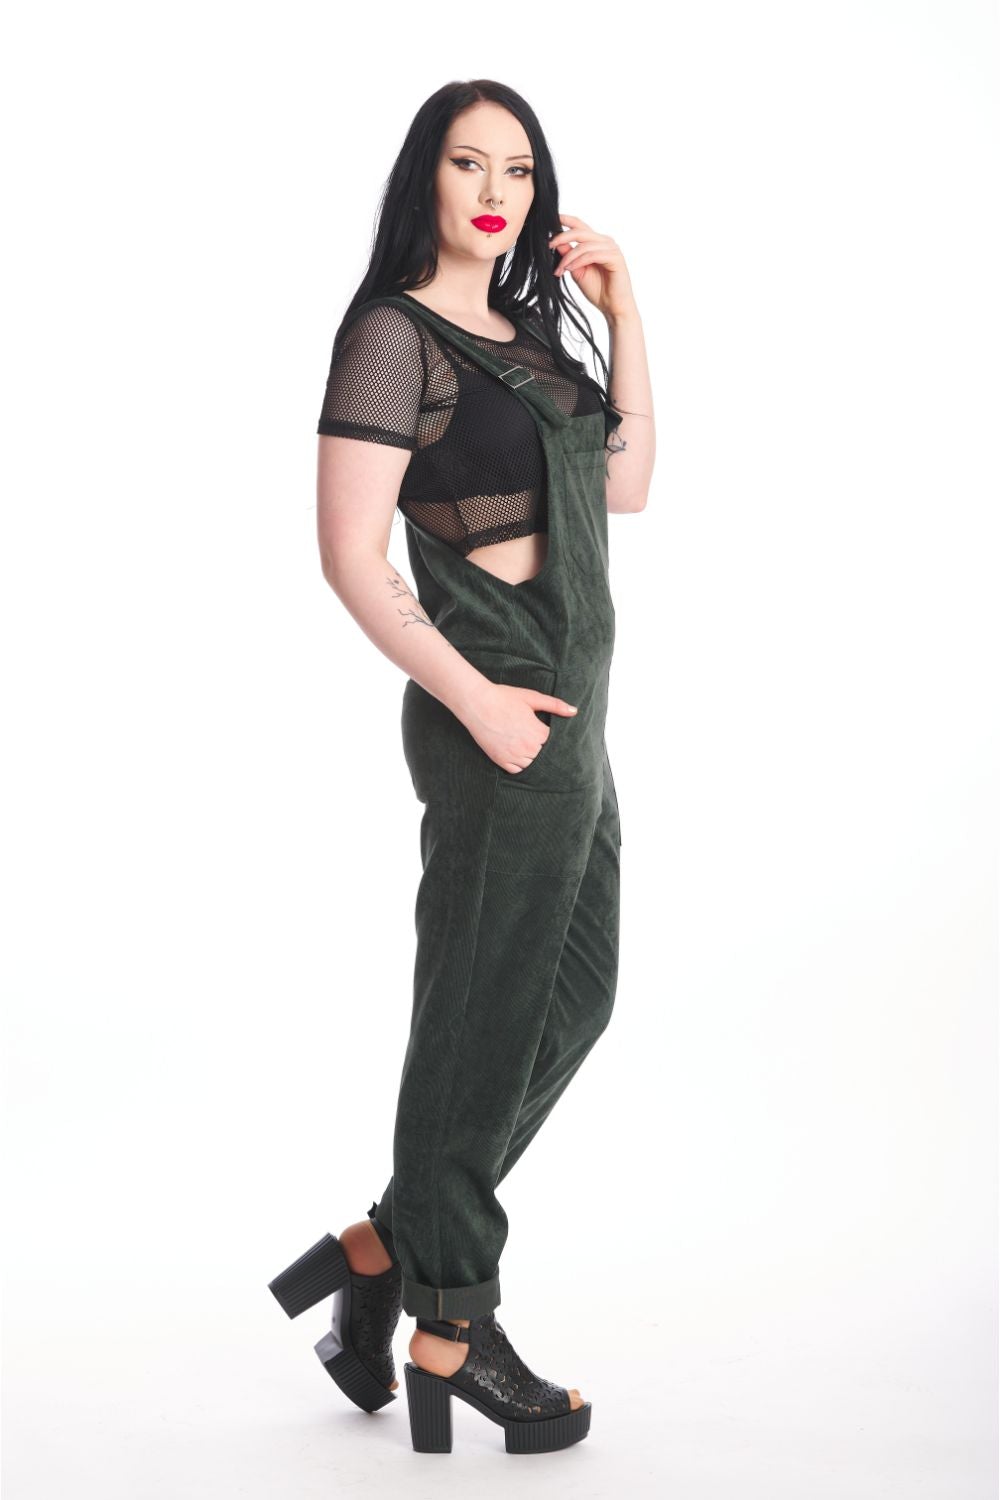 Alternative model in moss green dungarees with black mesh crop top underneath. 